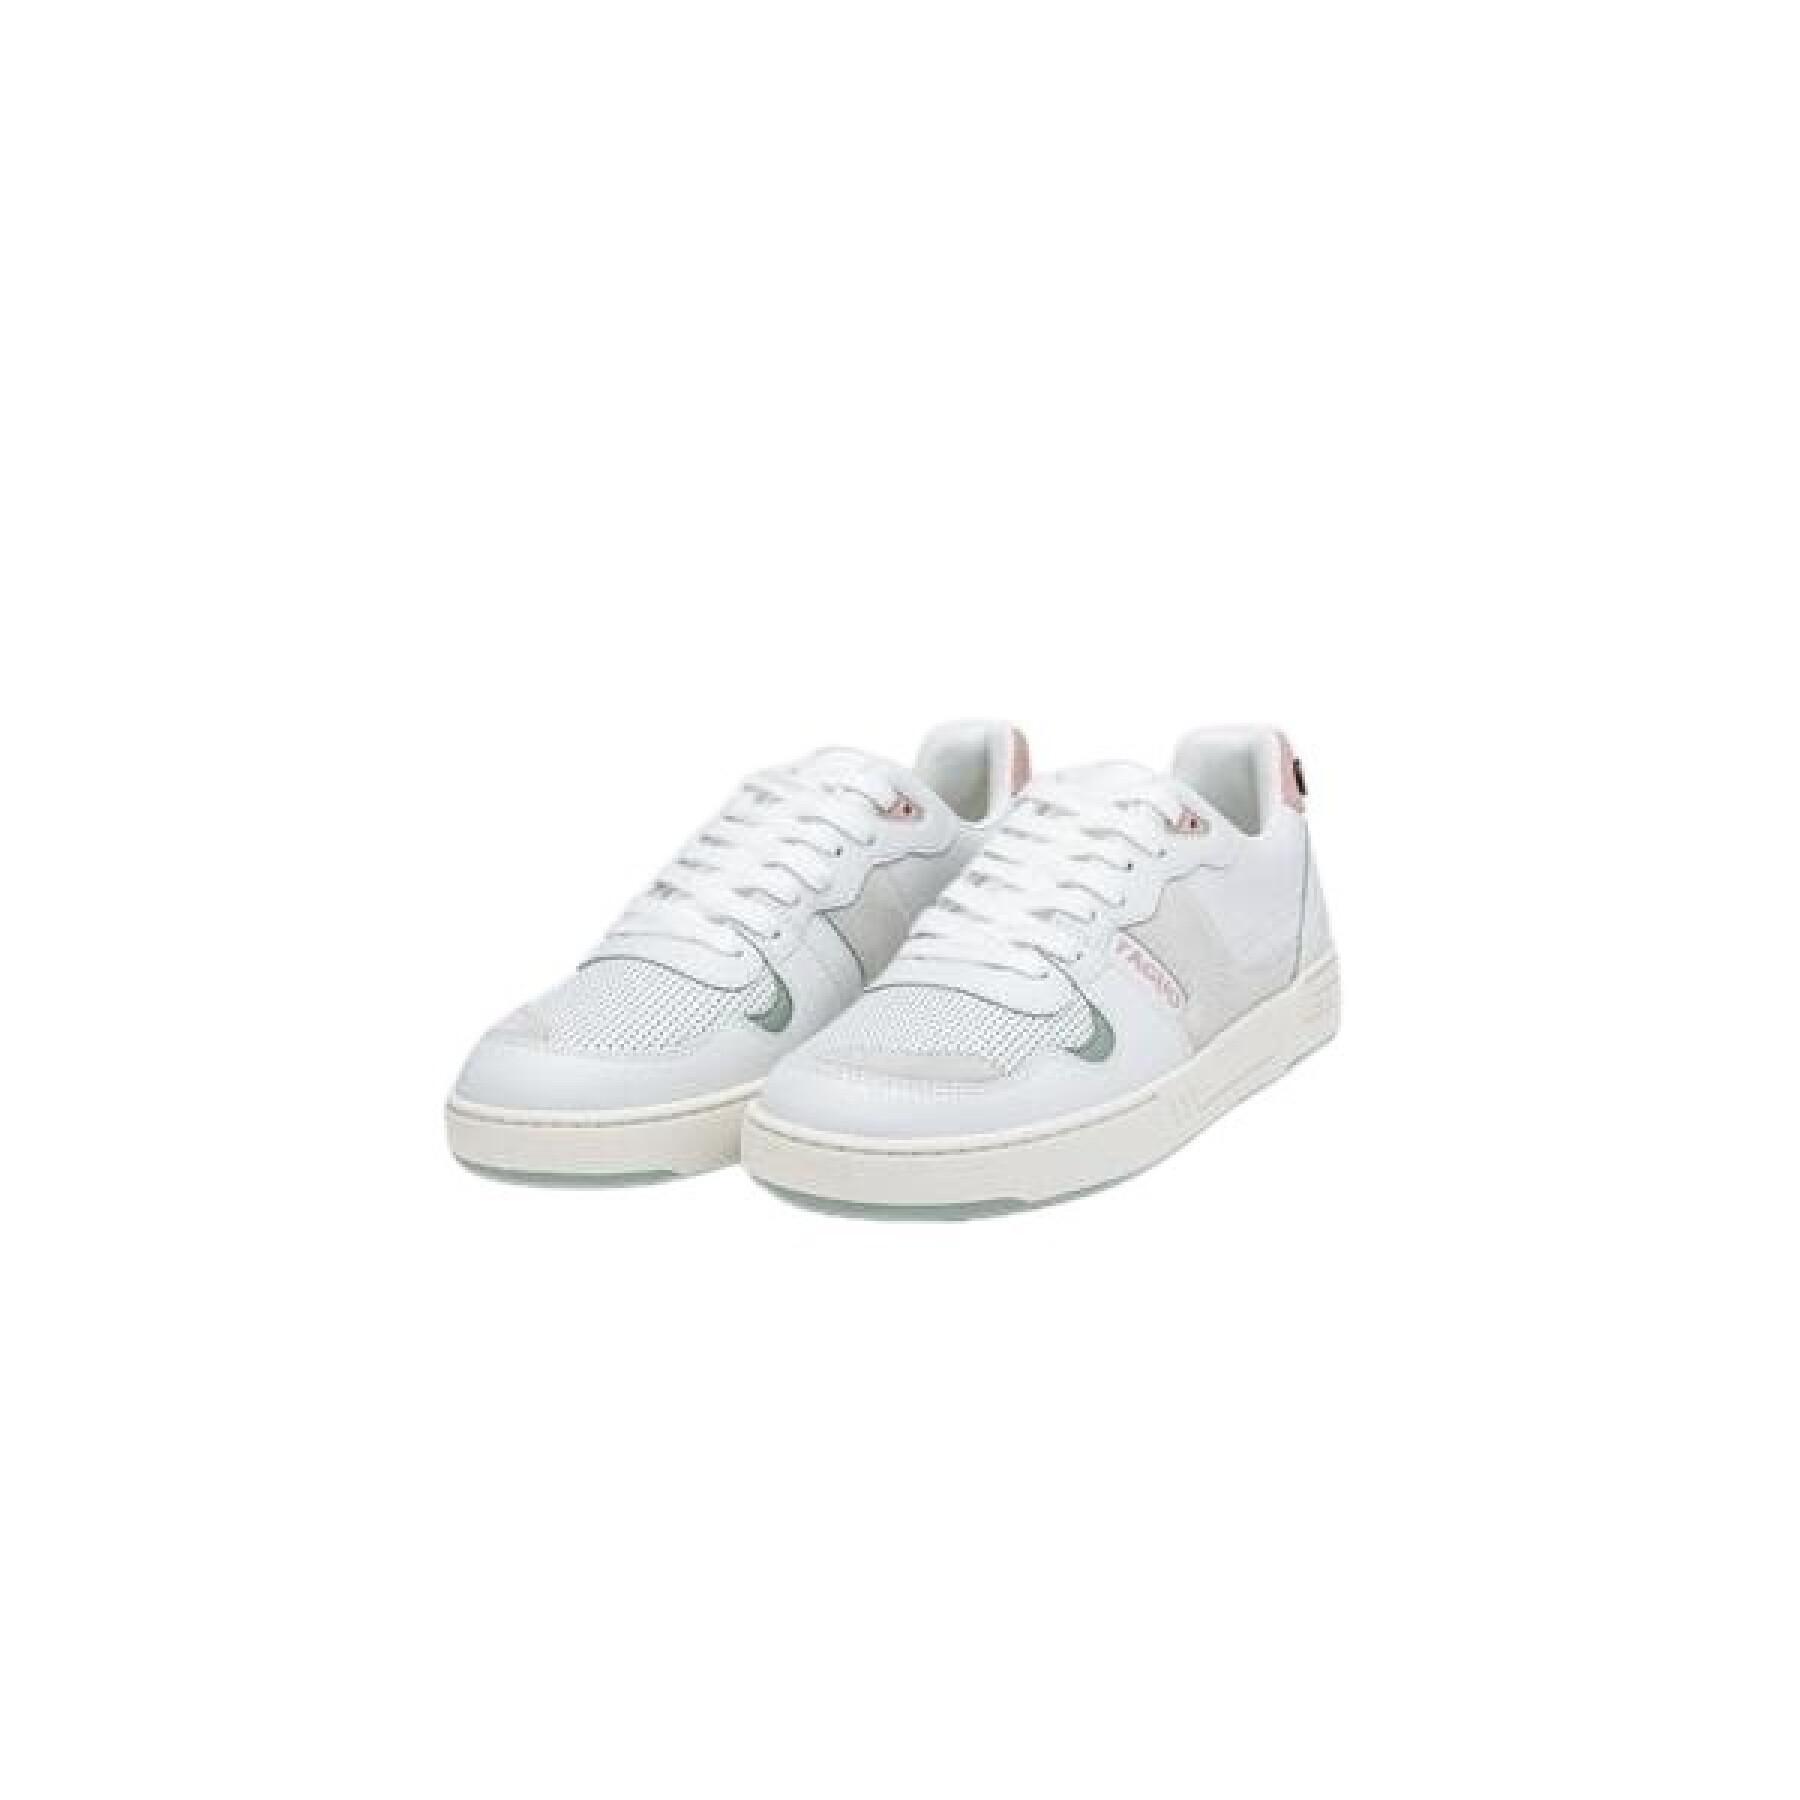 Suede leather sneakers woman Faguo Ceiba